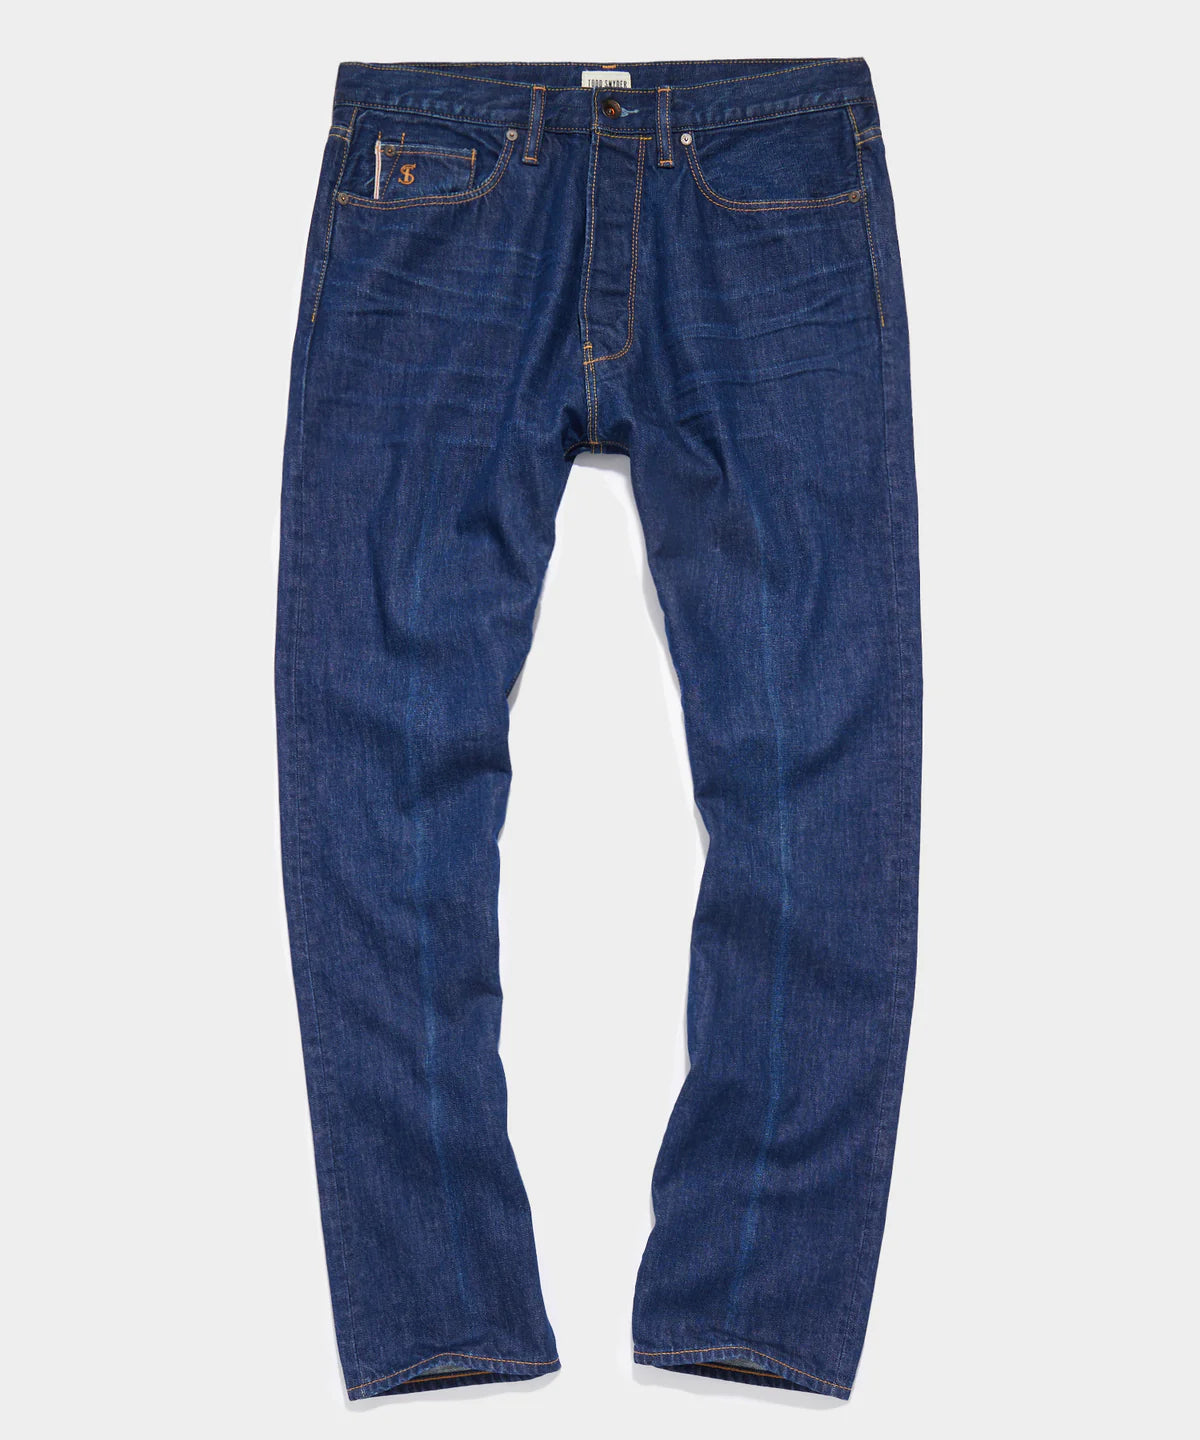 TODD SNYDER CLASSIC FIT SELVEDGE JEAN IN CREASED MEDIUM WASH